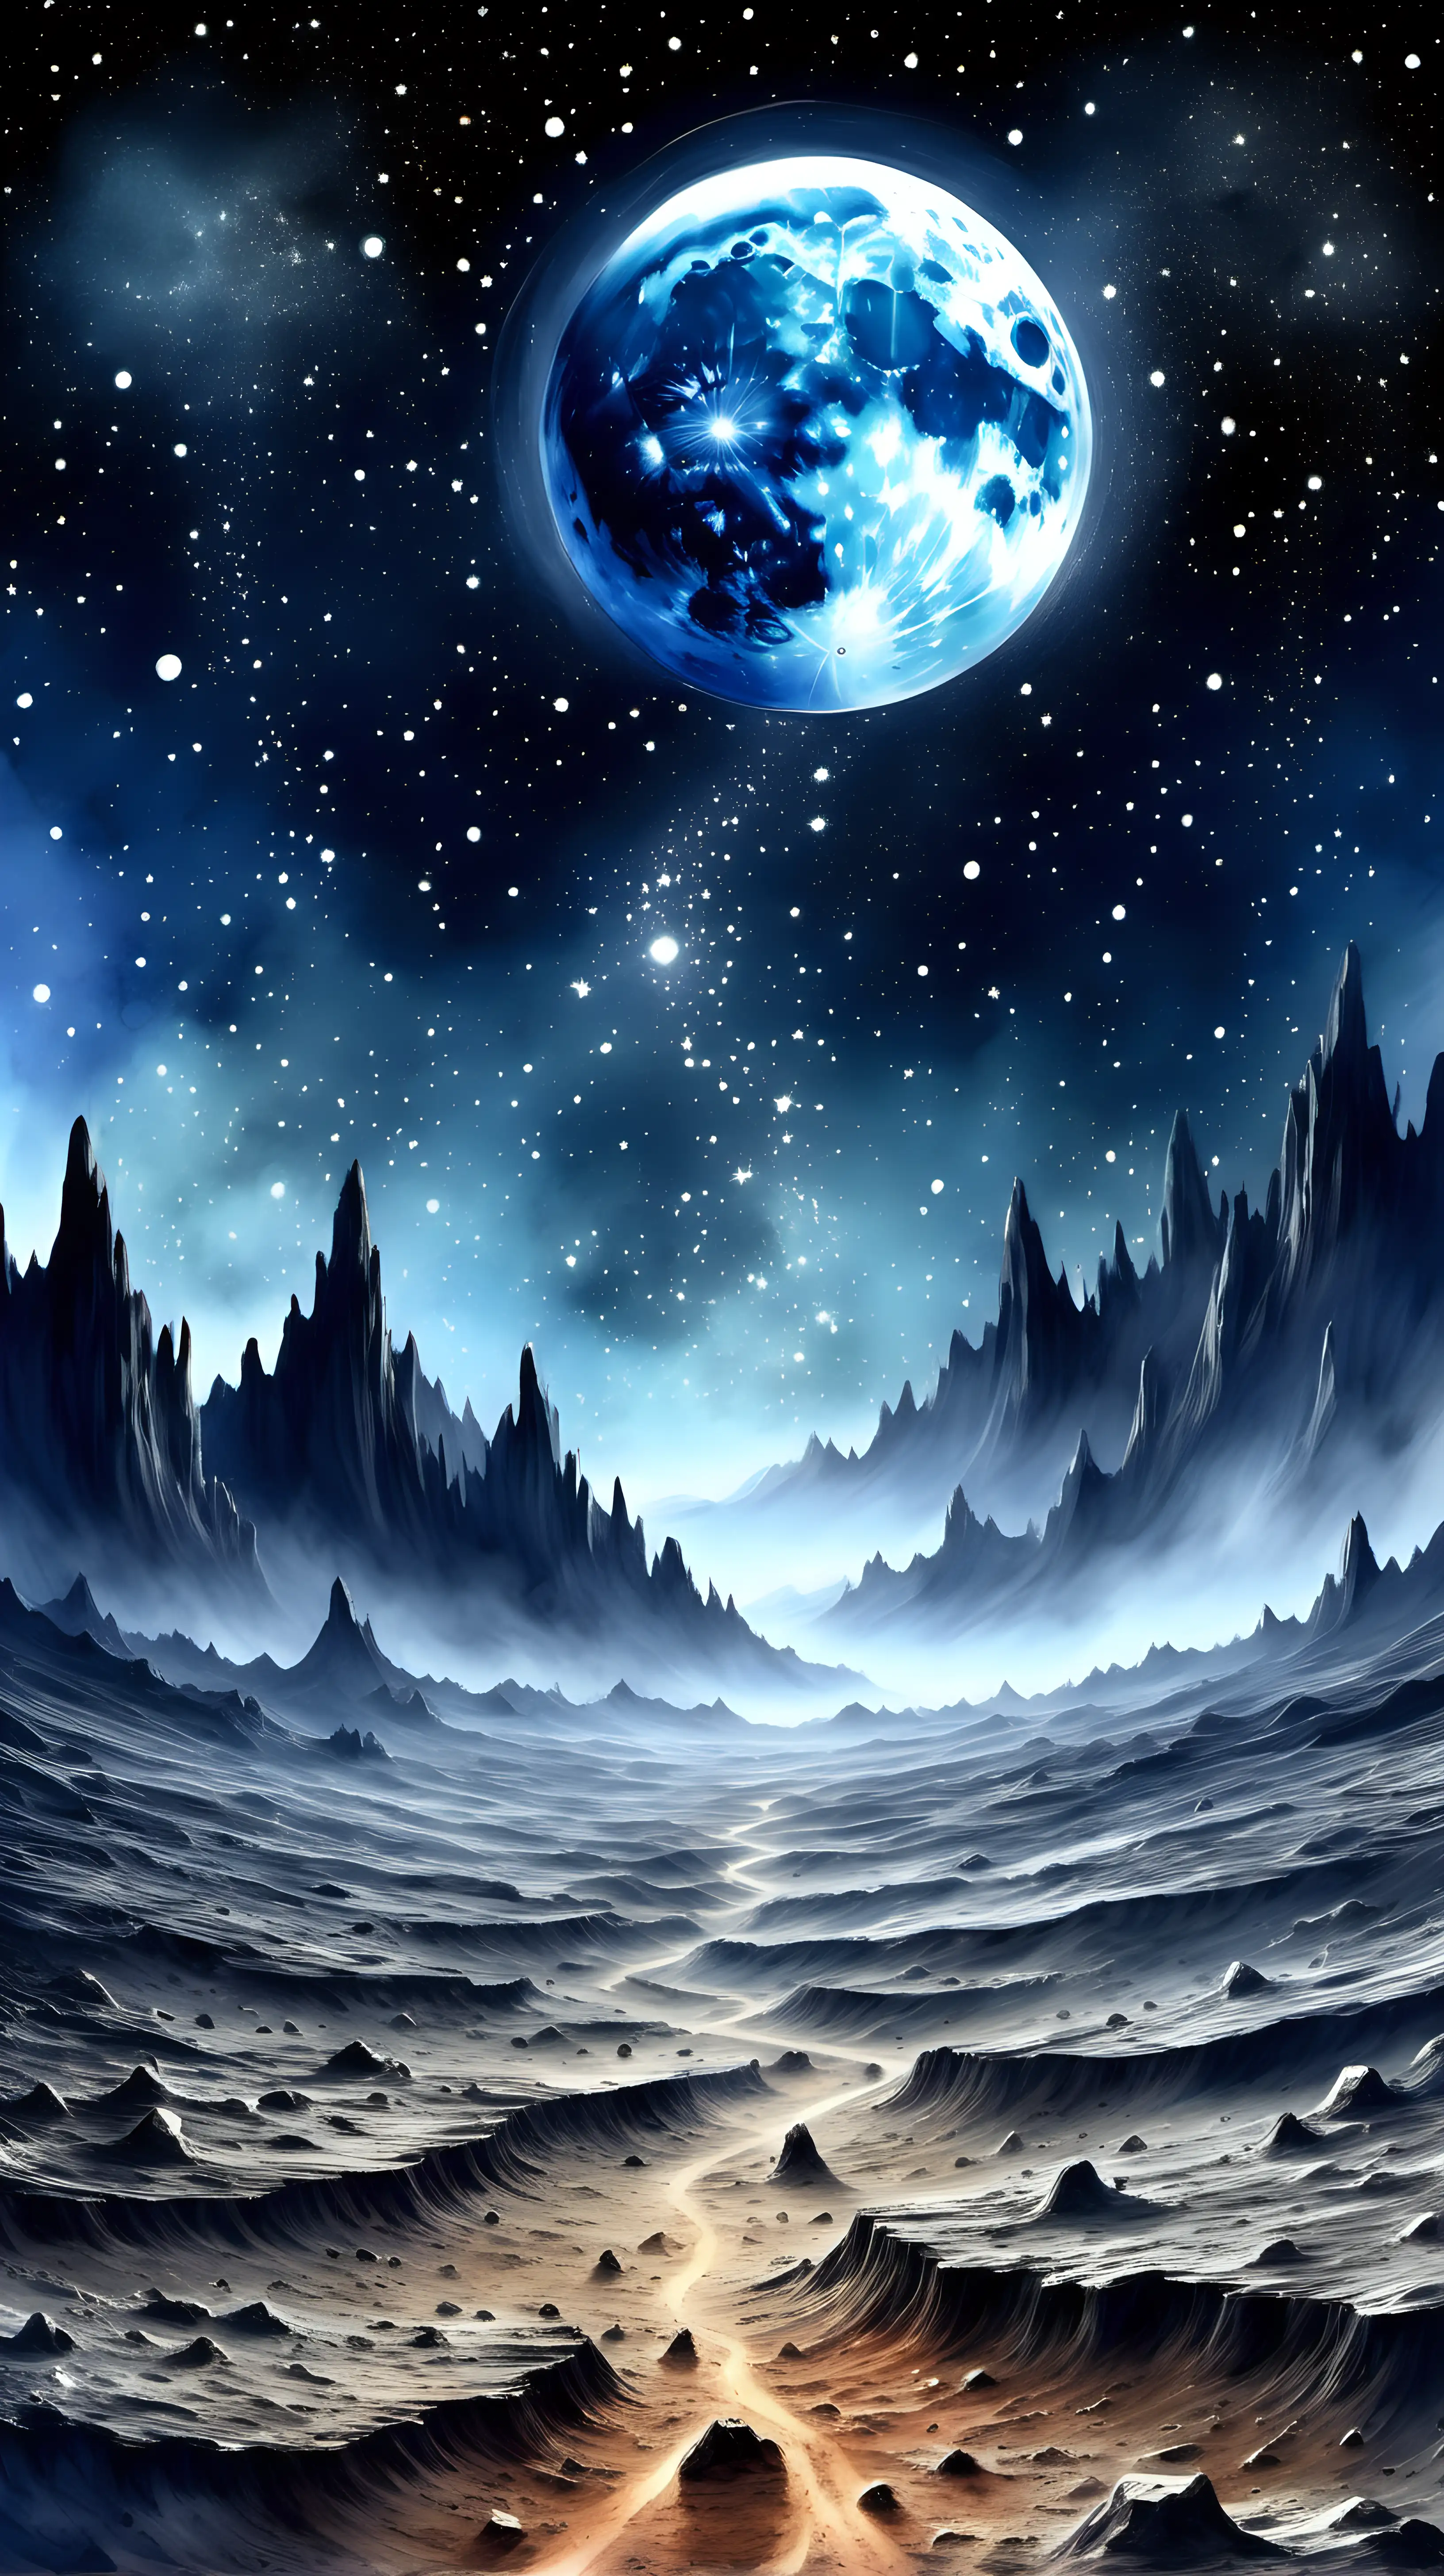 Enchanting Moonlit Landscape Magical Earth View with Shining Ground and Stars